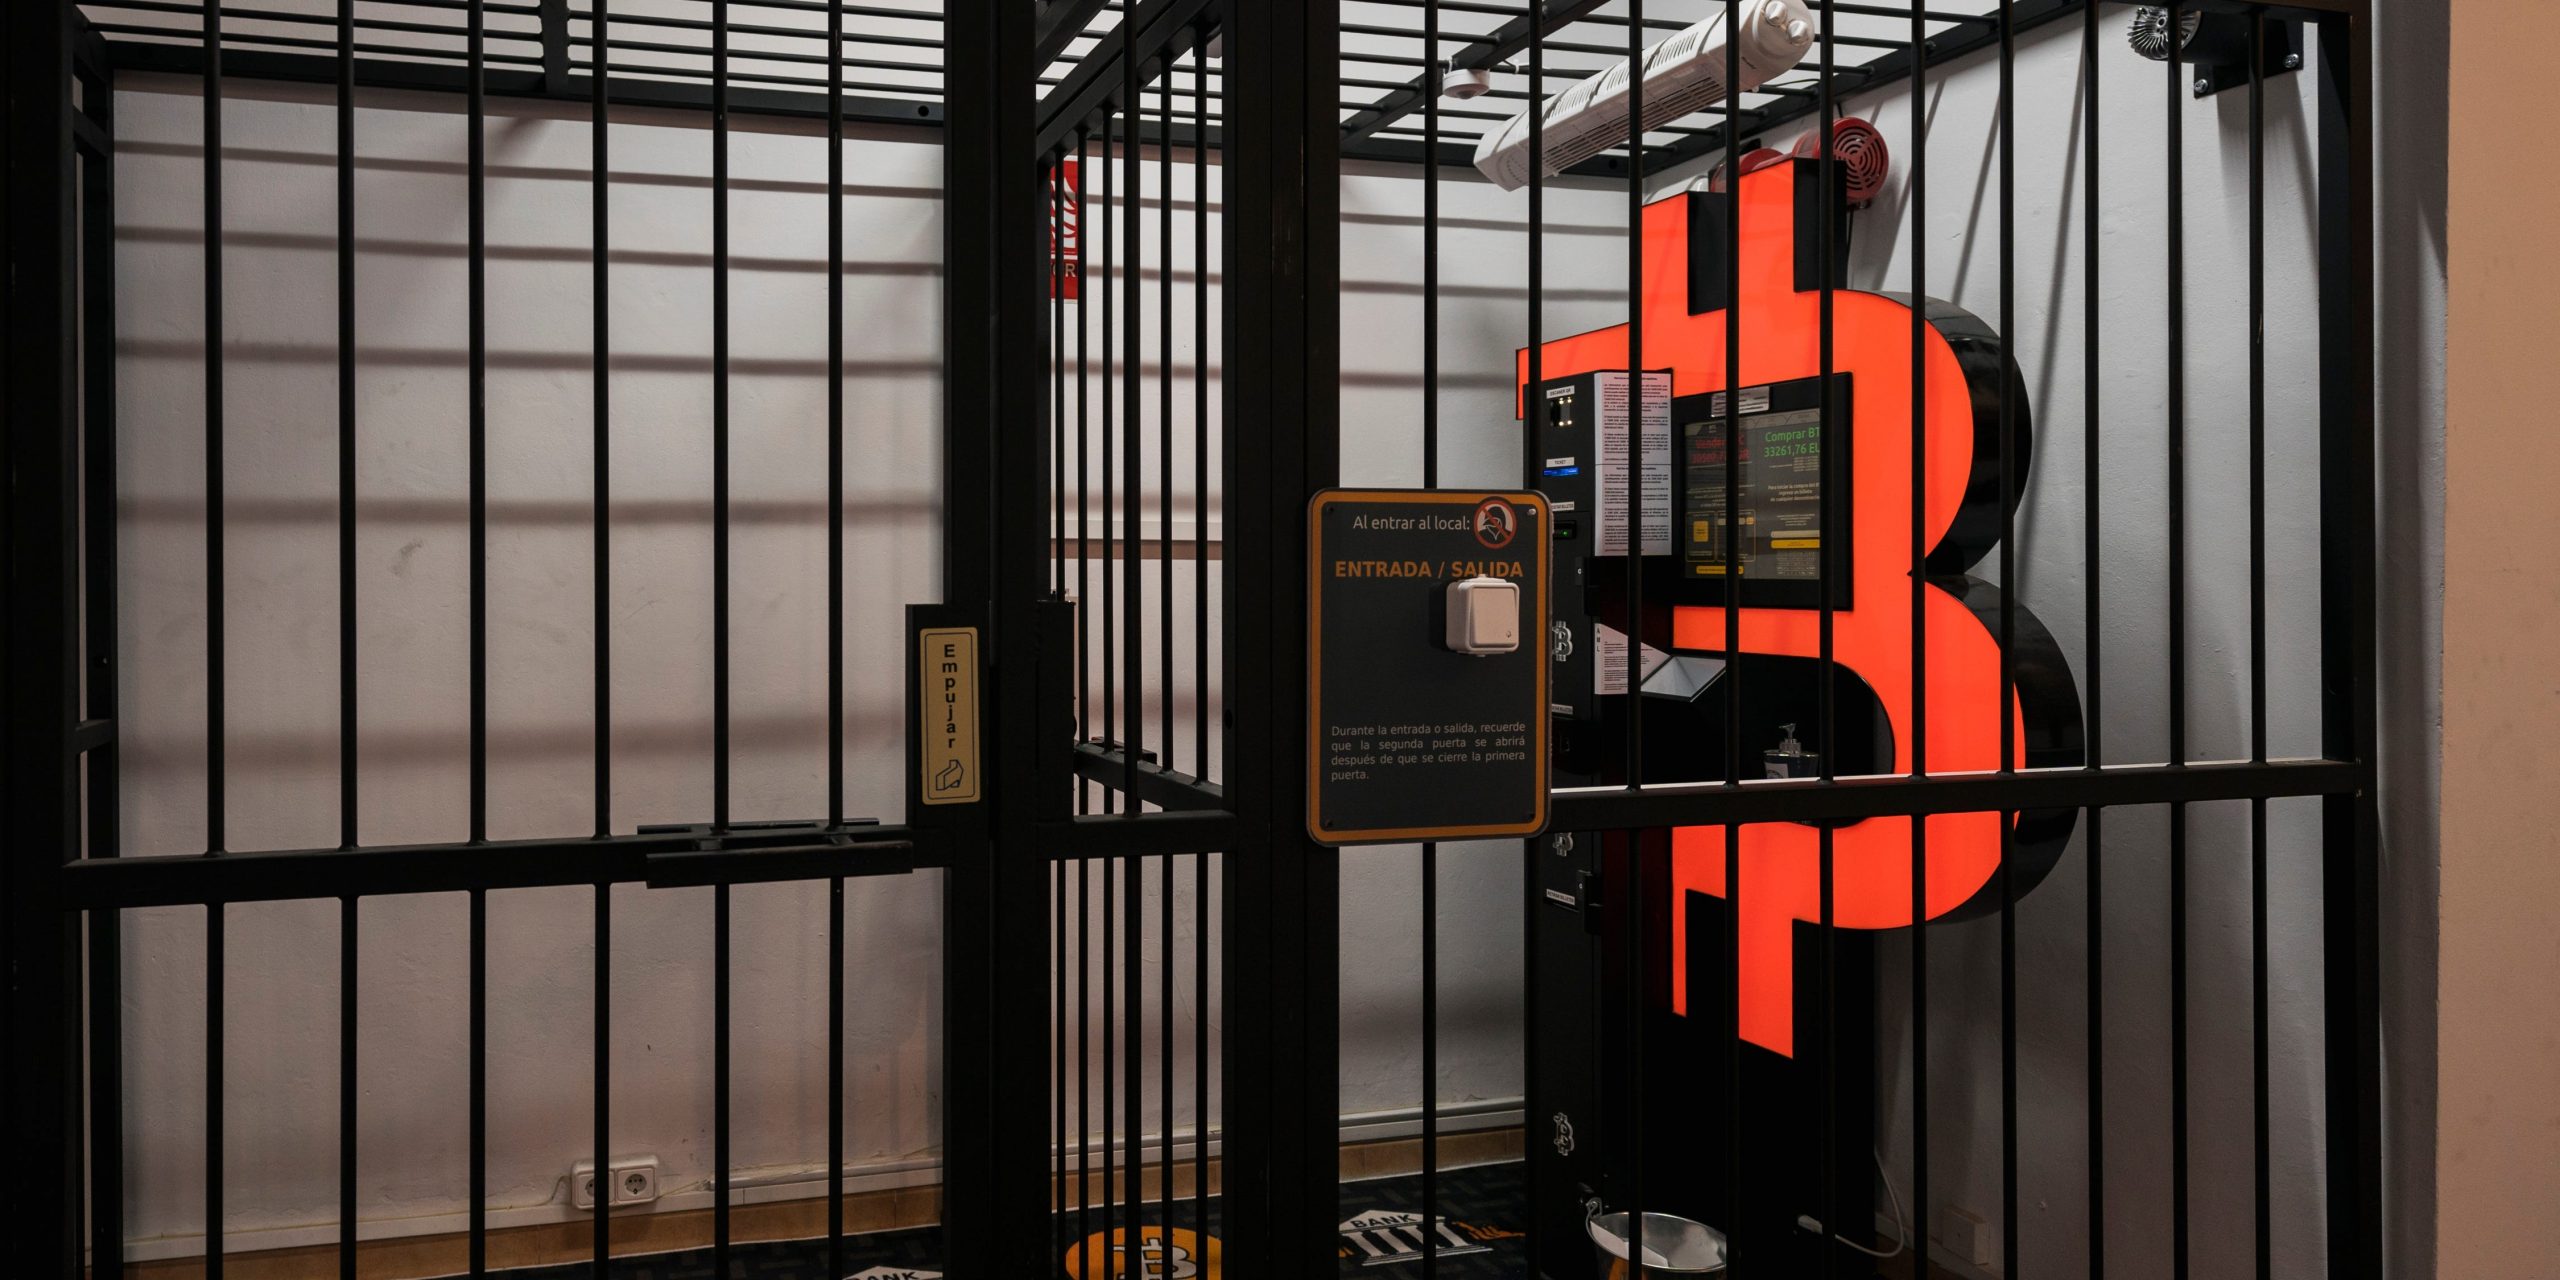 A bitcoin ATM machine, to buy or sell cryptocurrencies, is placed within a safety cage on January 29, 2021 in Barcelona, Spain.